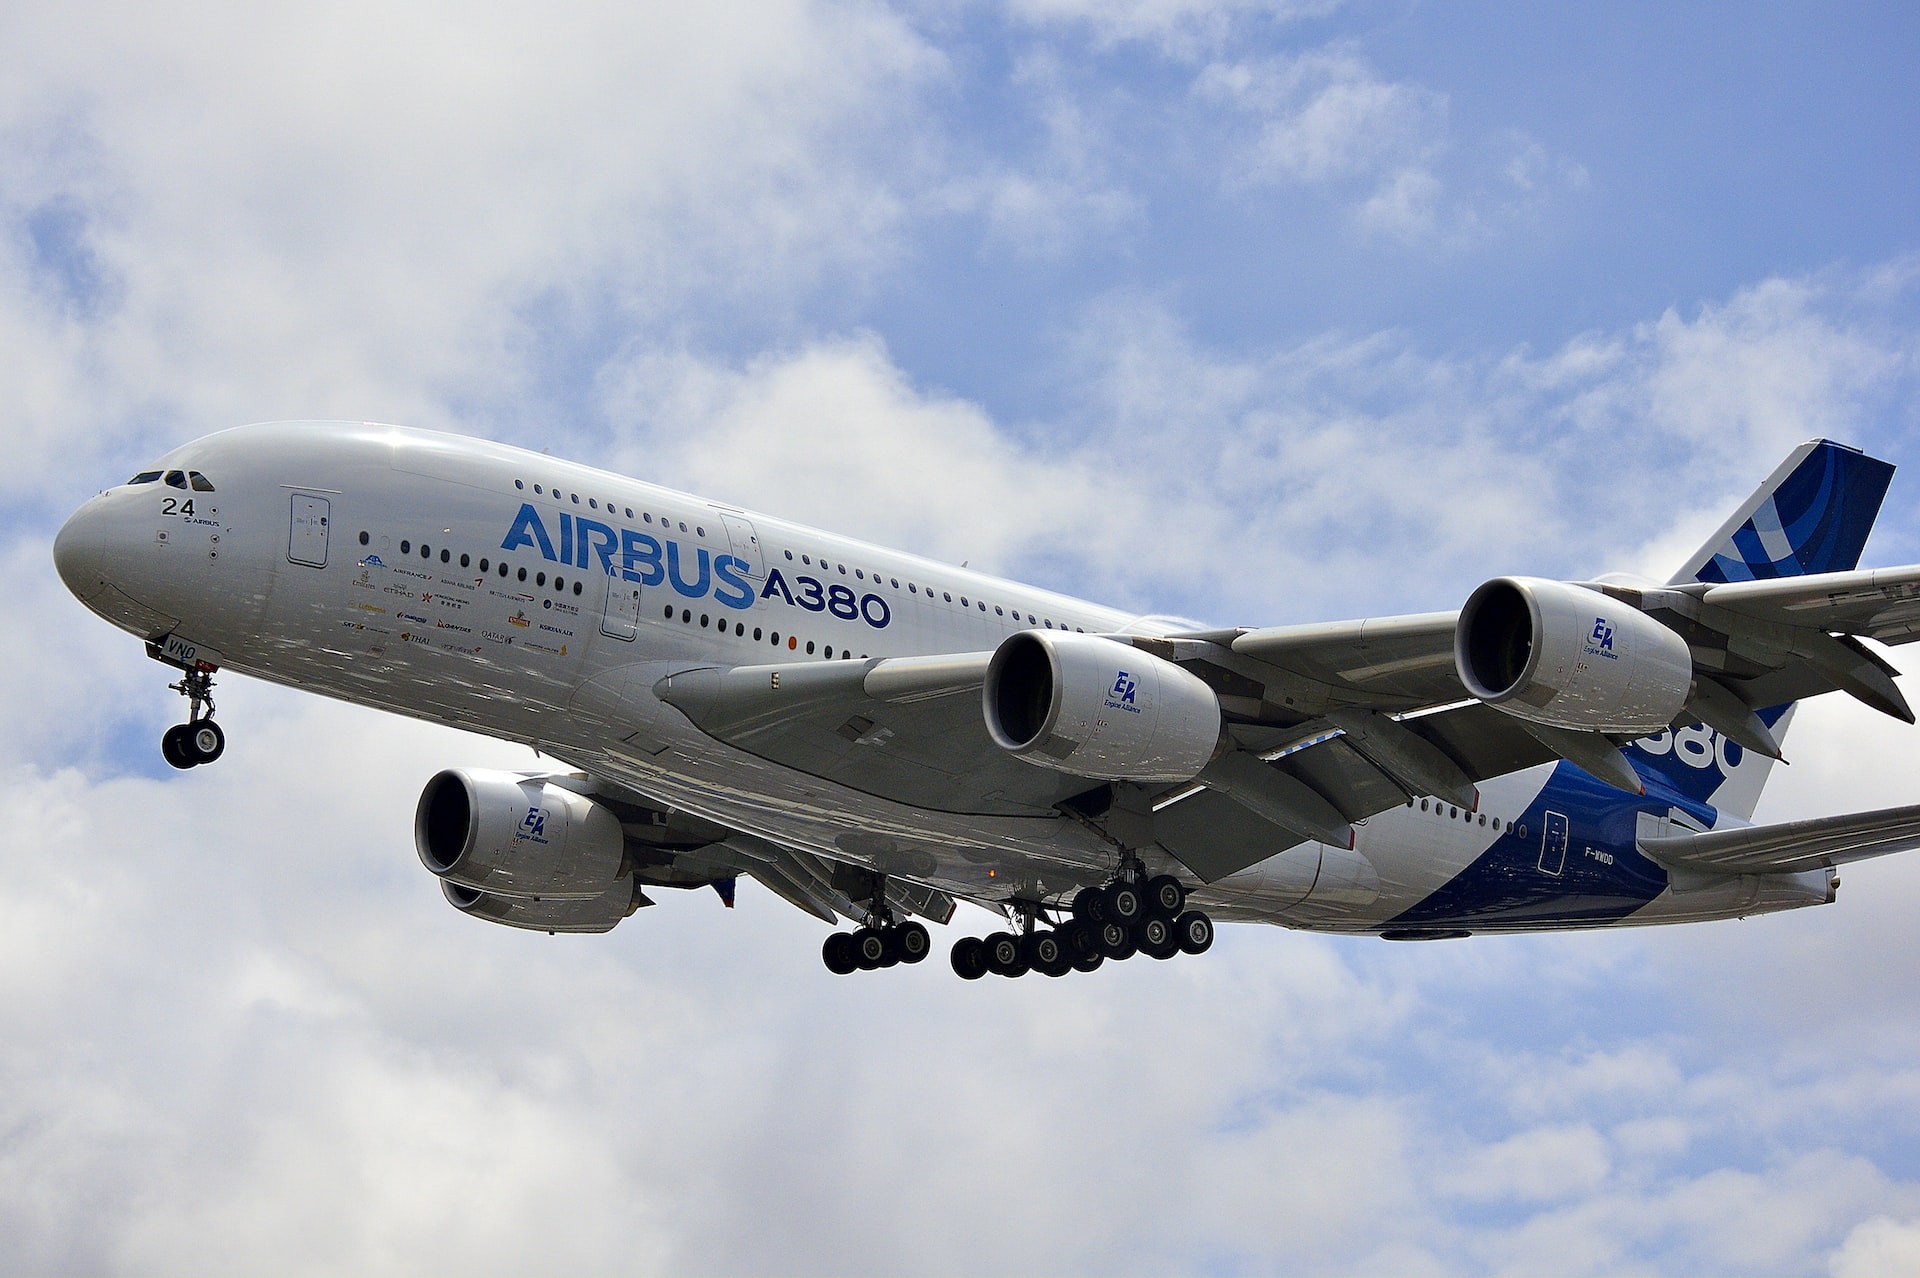 Airbus A380 up in a cloudy sky during a Paris airshow in Le Bourget, France